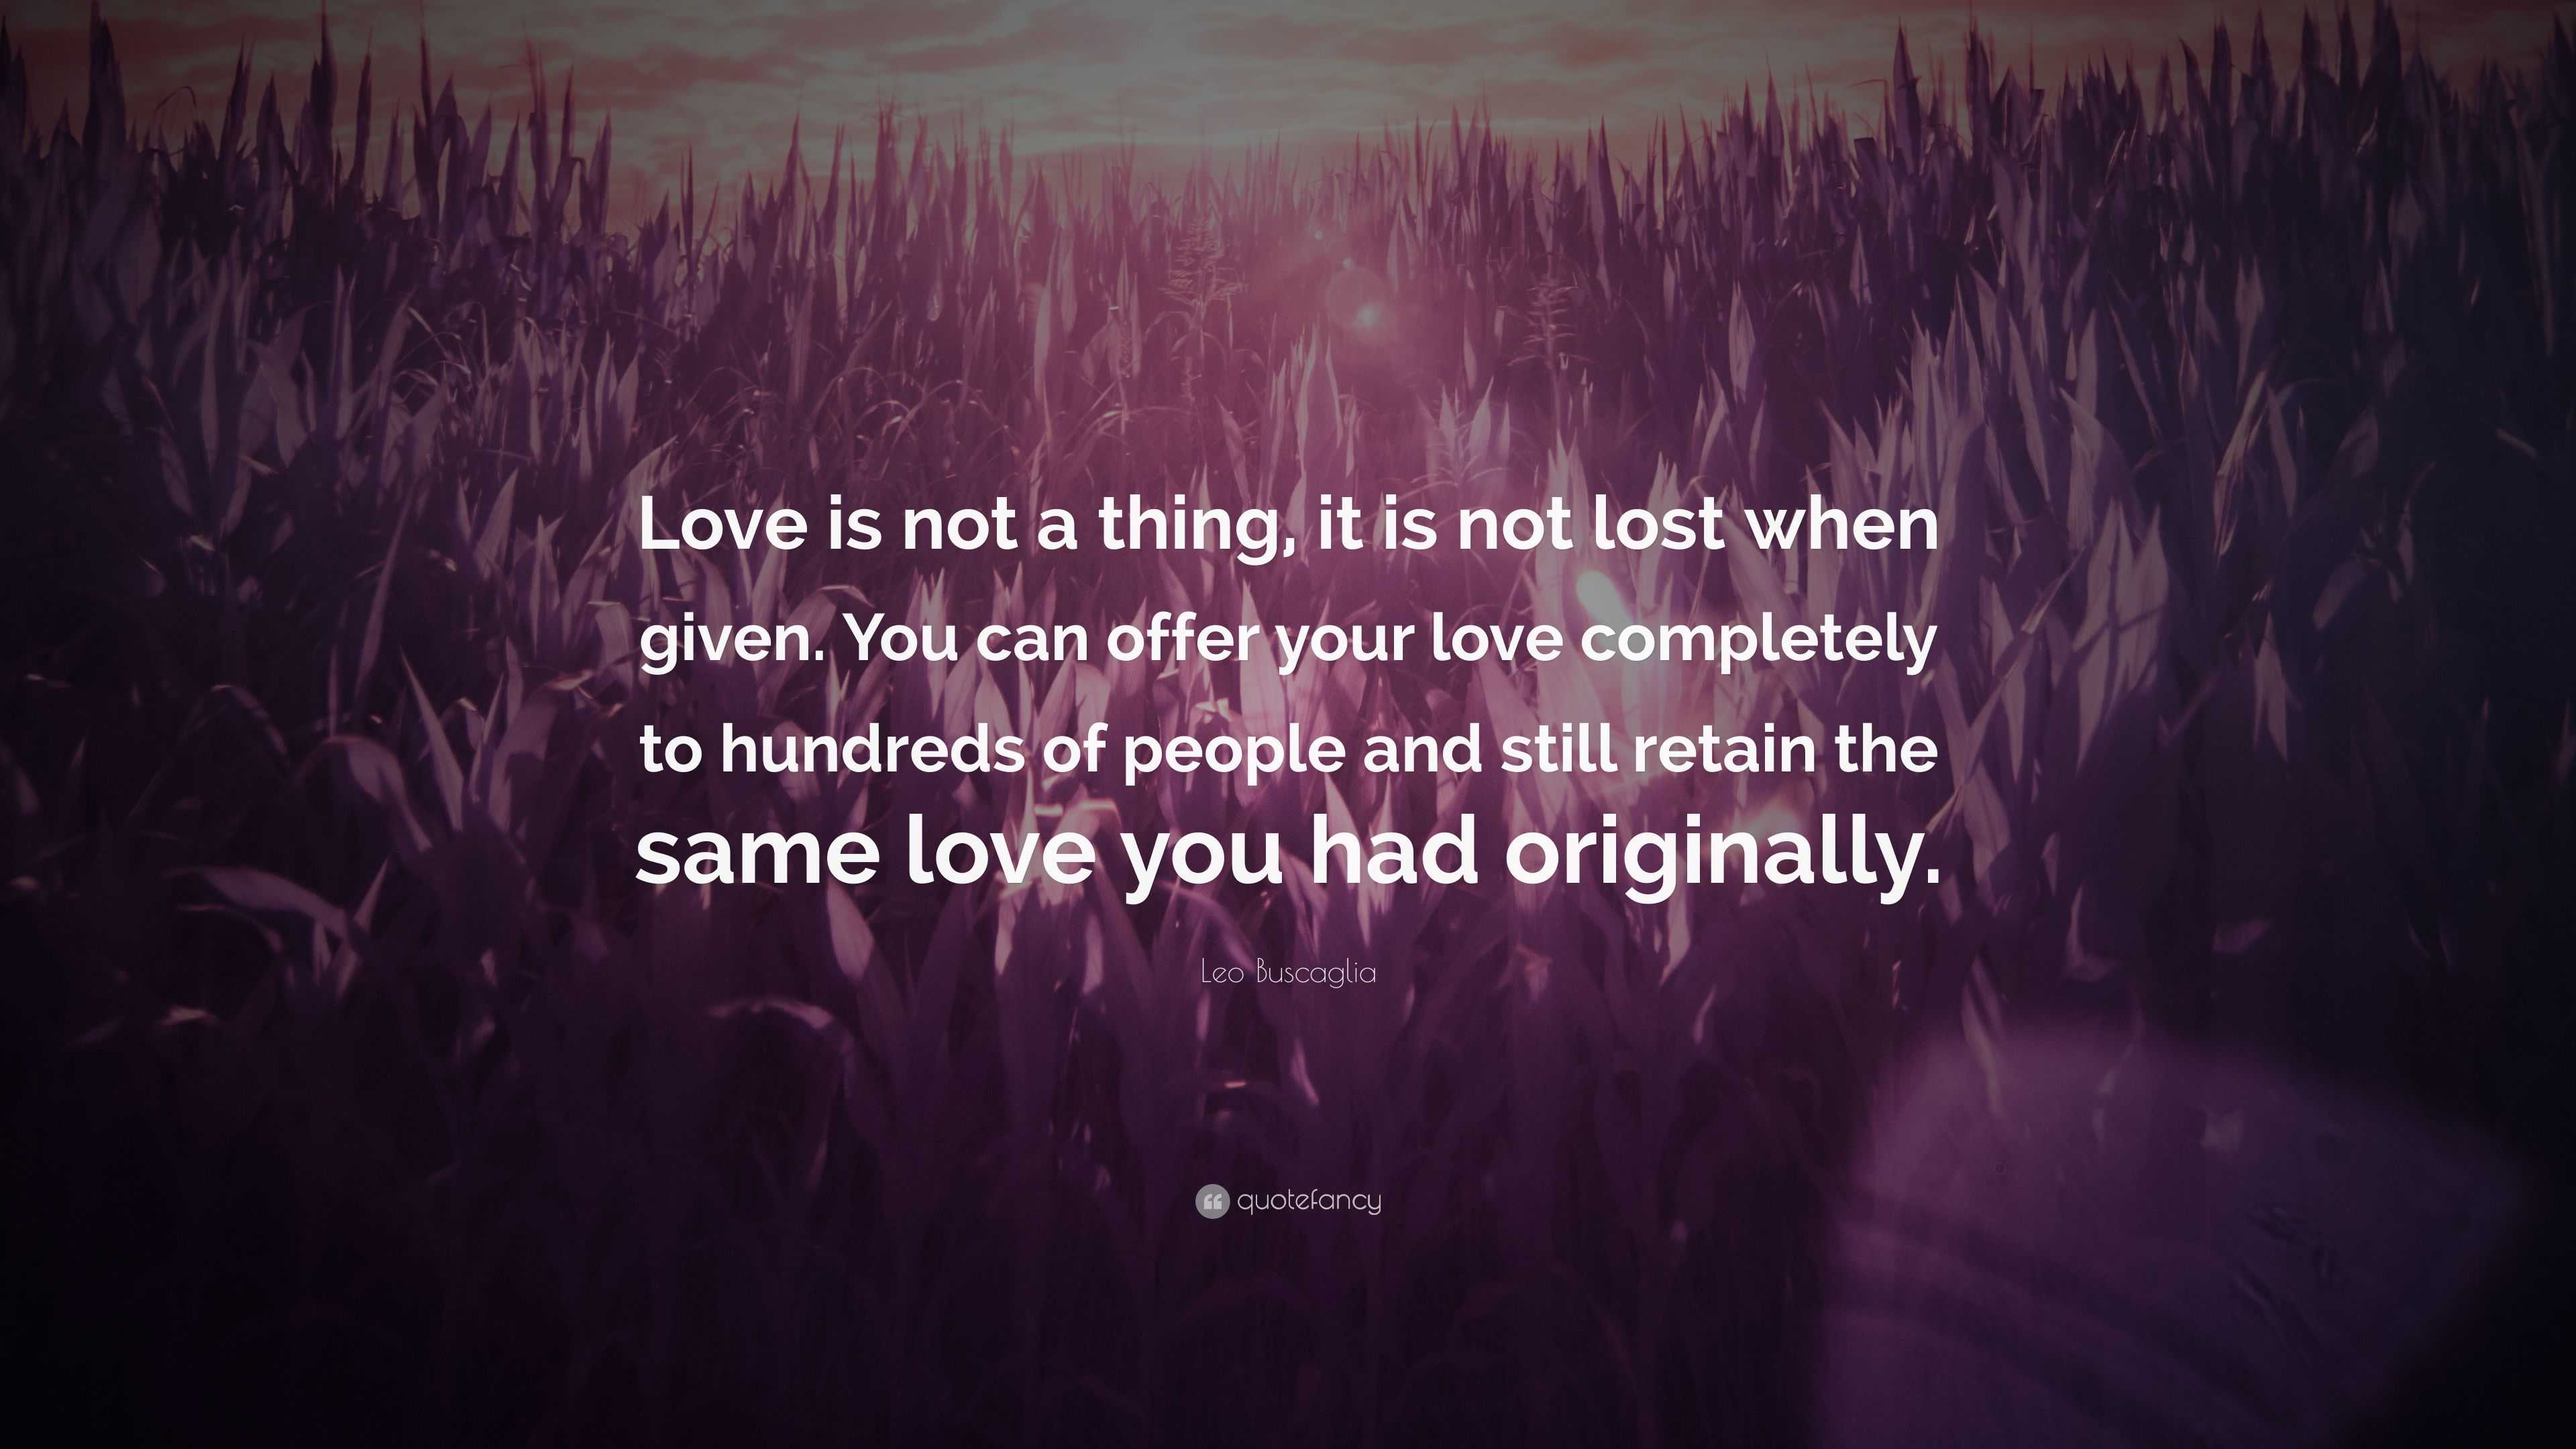 Leo Buscaglia Quote: “Love is not a thing, it is not lost when given ...